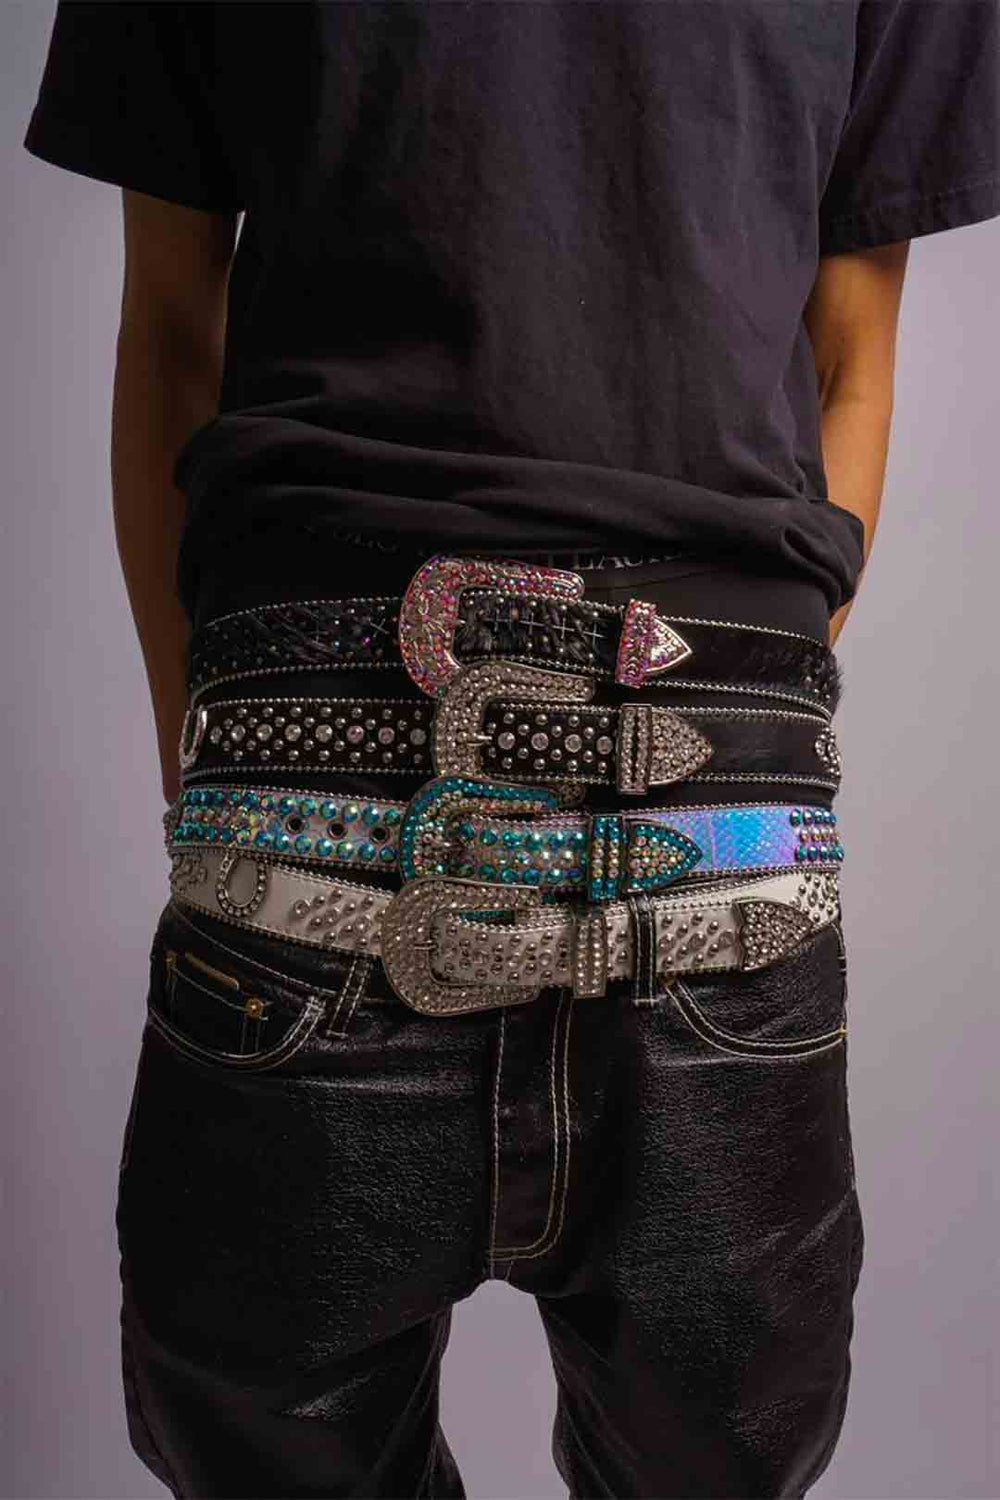 Belts Outfits - How To Wear A Belt